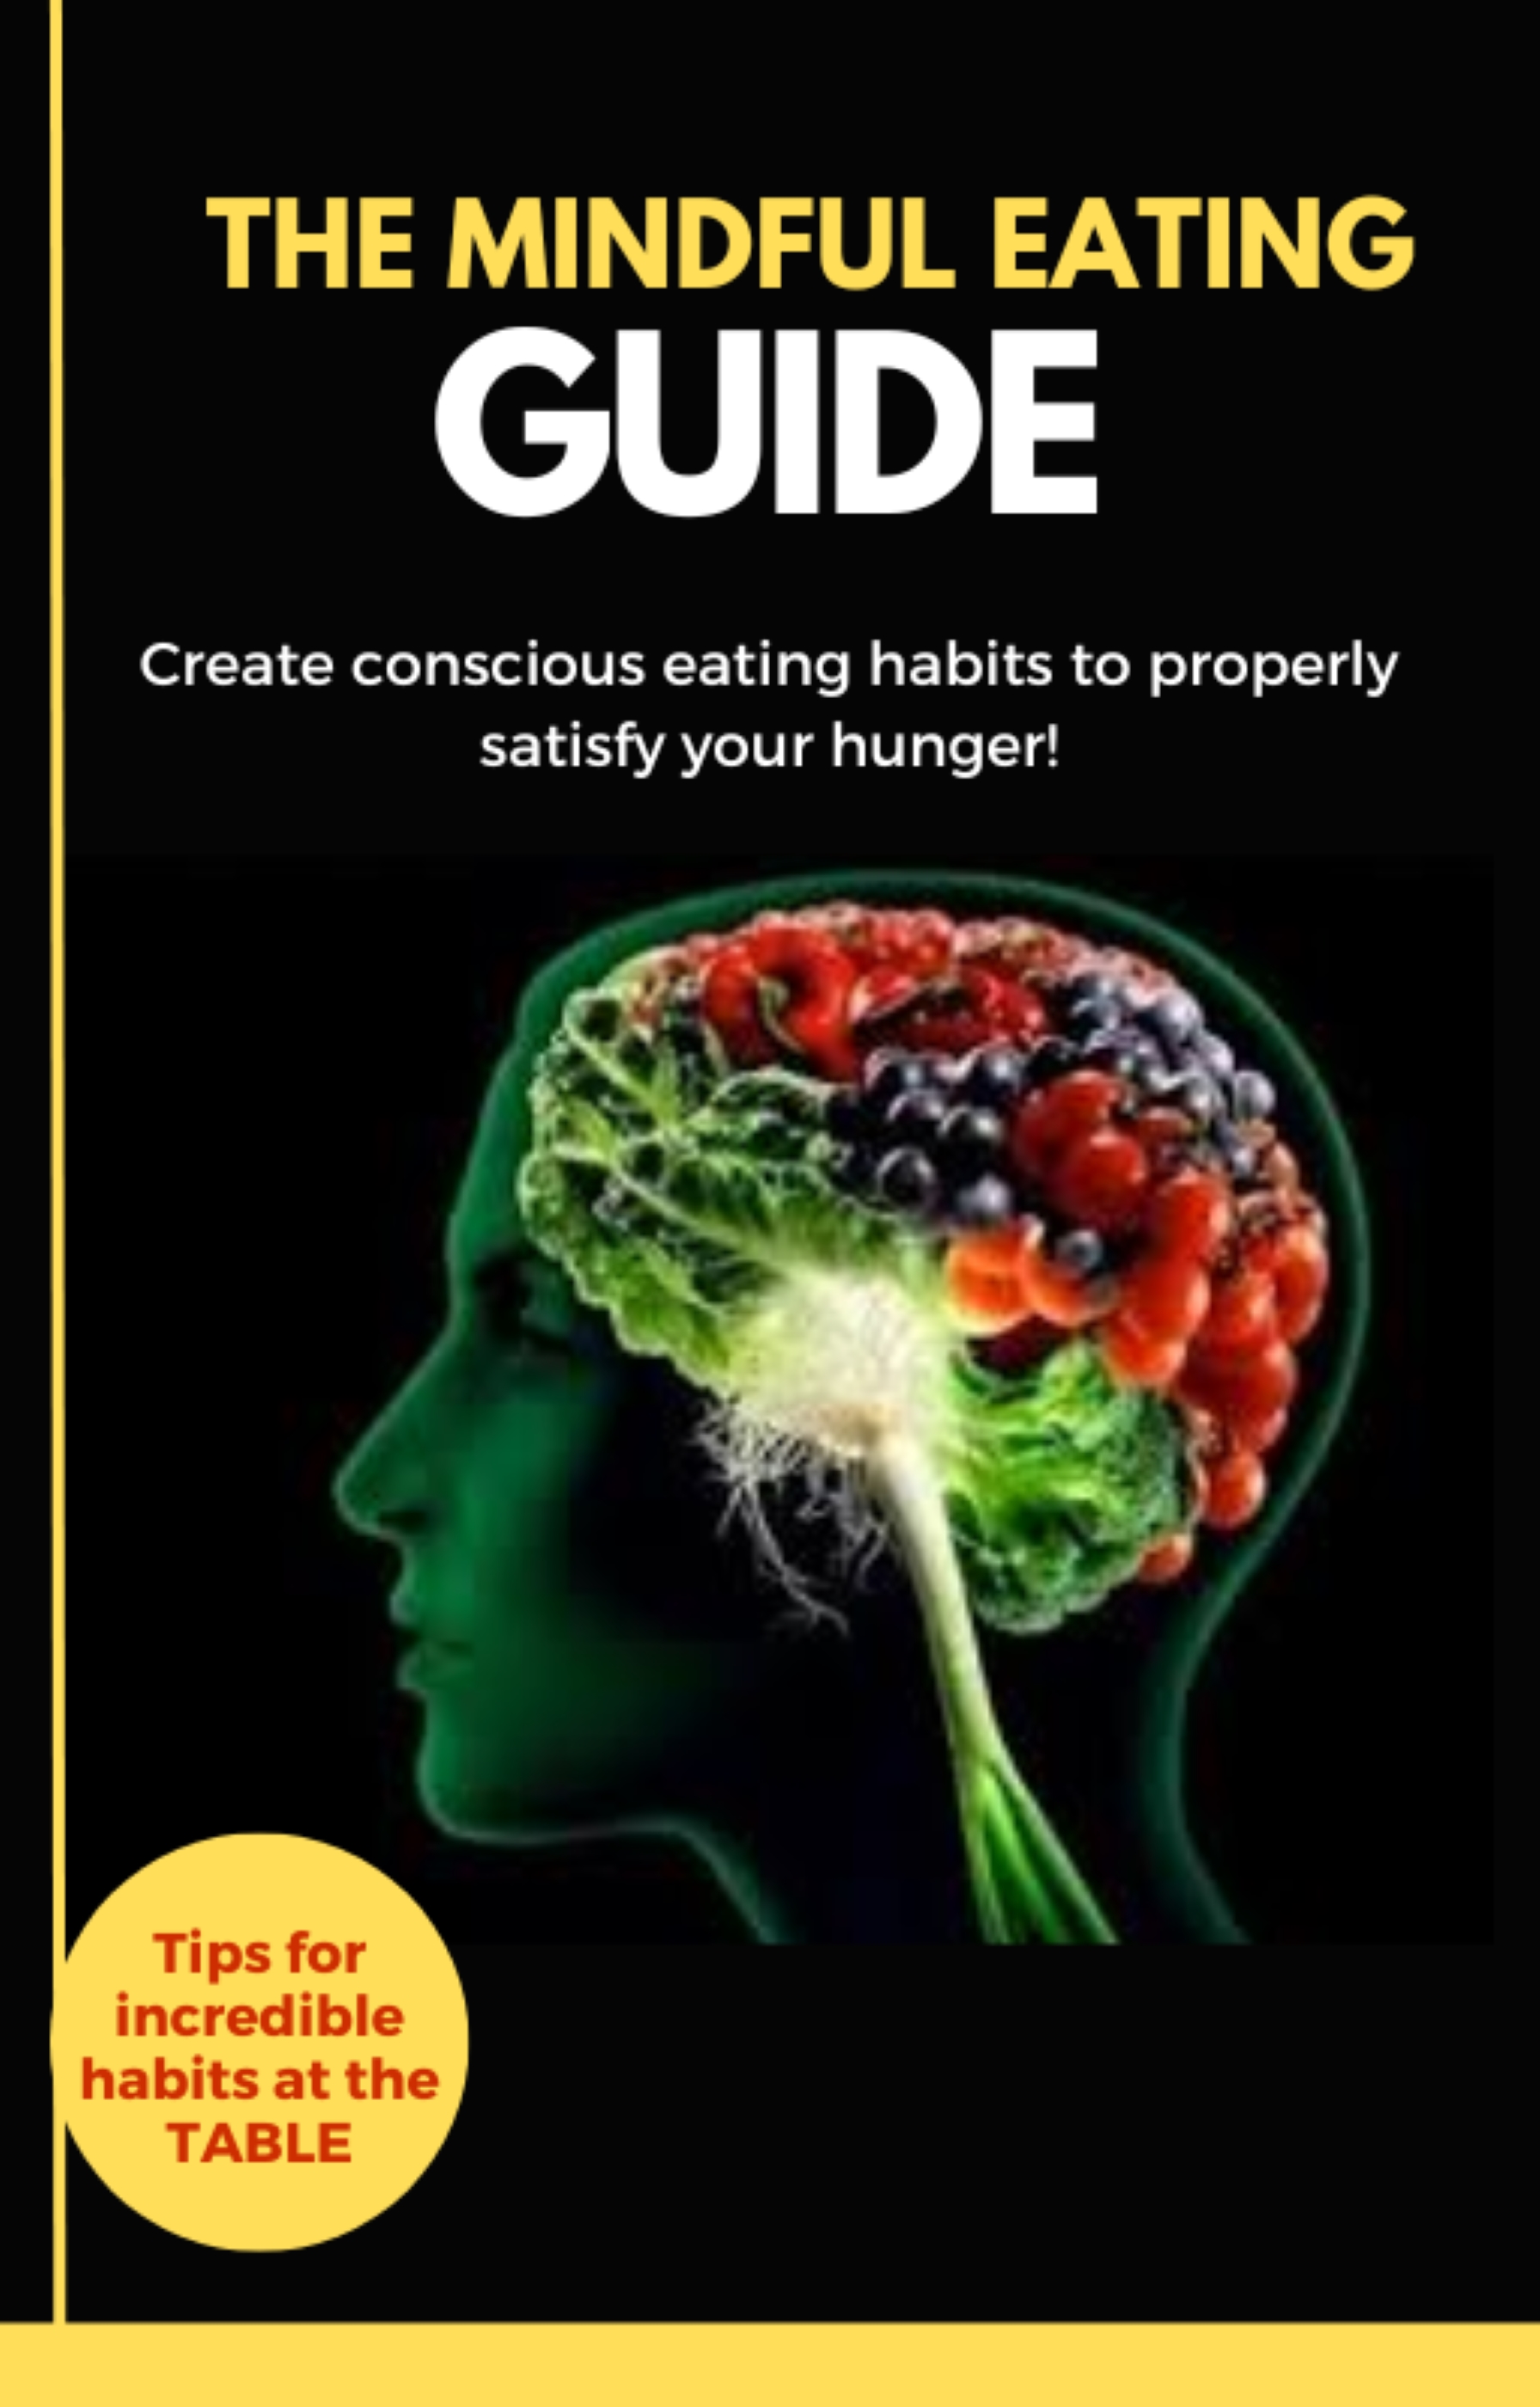 The mindful eating guide